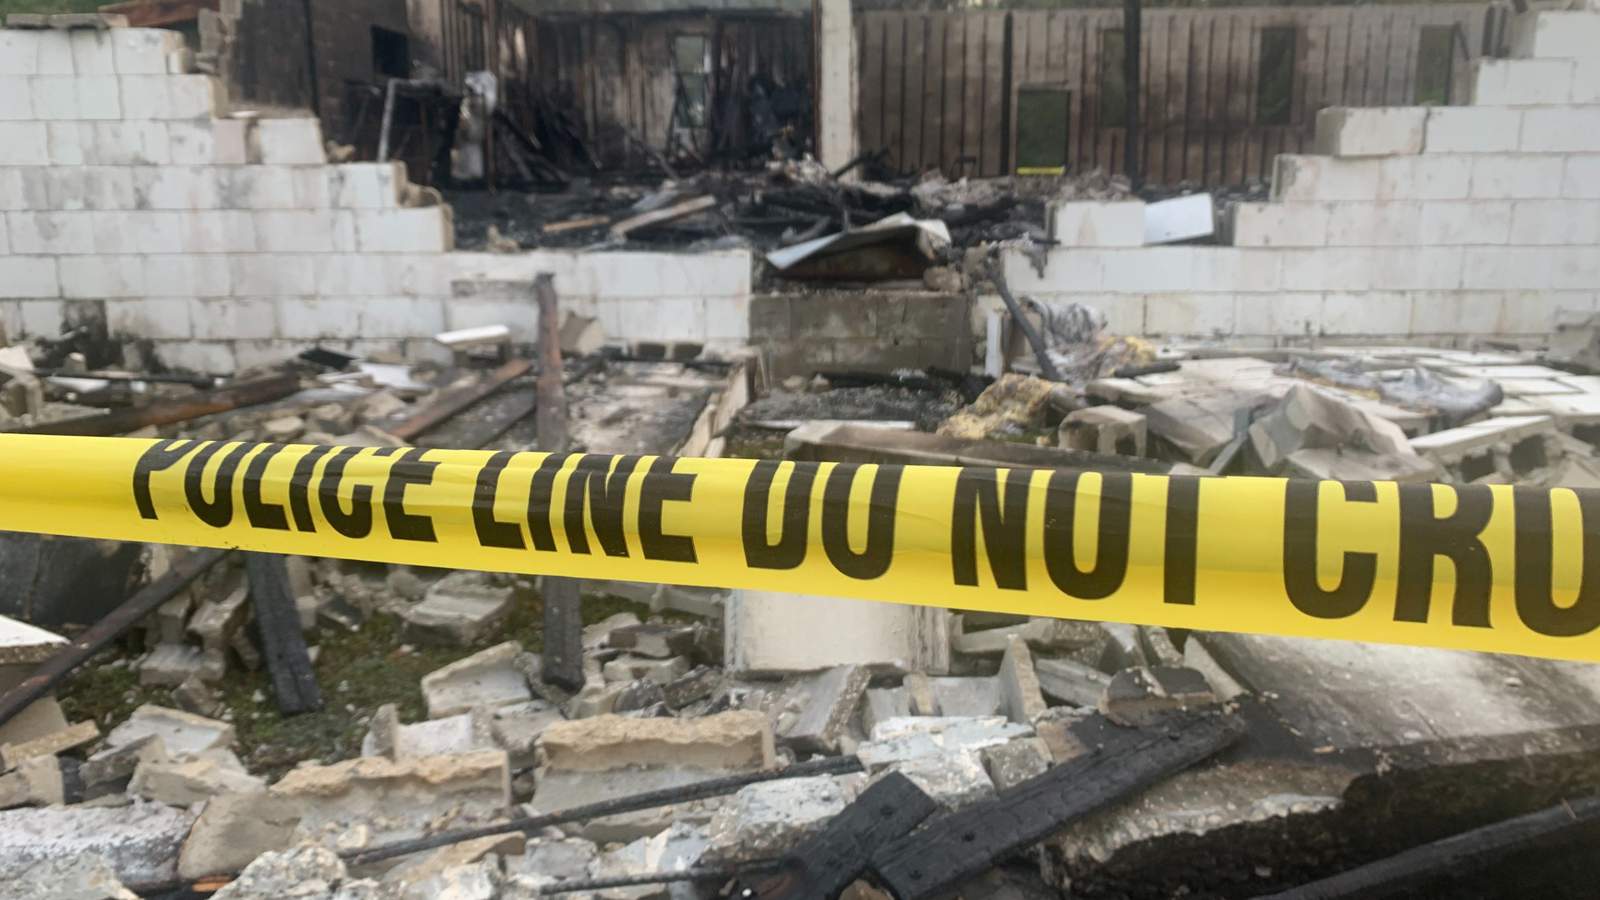 ‘Suspicious’ fire leaves historic Black church in ruins in Clay County